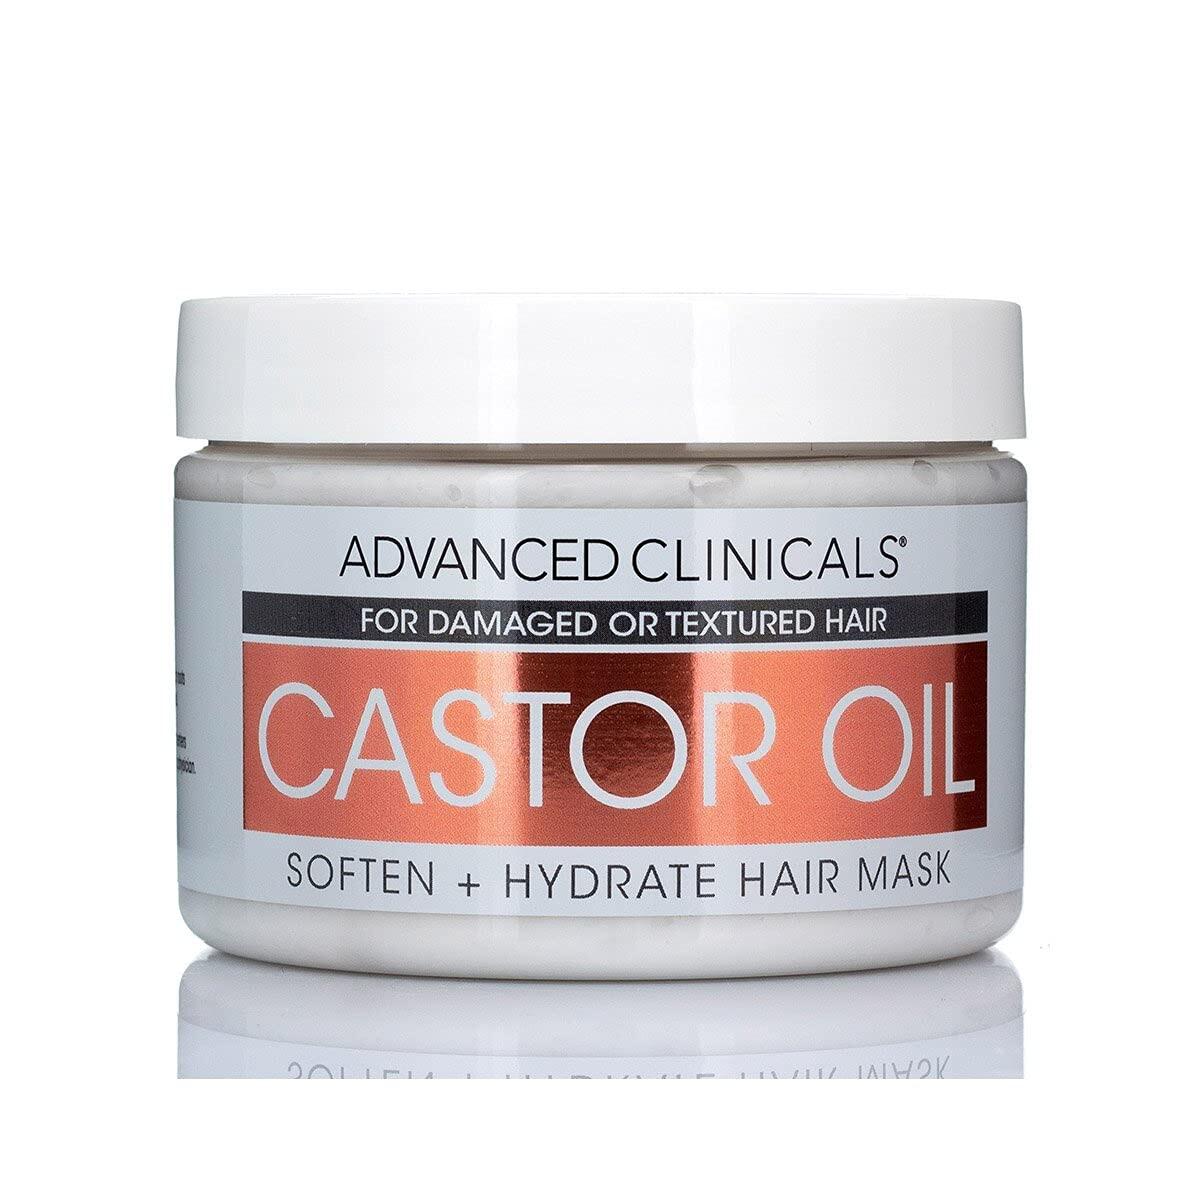 Advanced Clinicals Castor Oil Conditioning Hair Mask 12 Fl Oz　アドバンスド クリニカルズ キャスターオイル ヘア リペアマスク 355ml ヘアケア　トリートメント　傷み